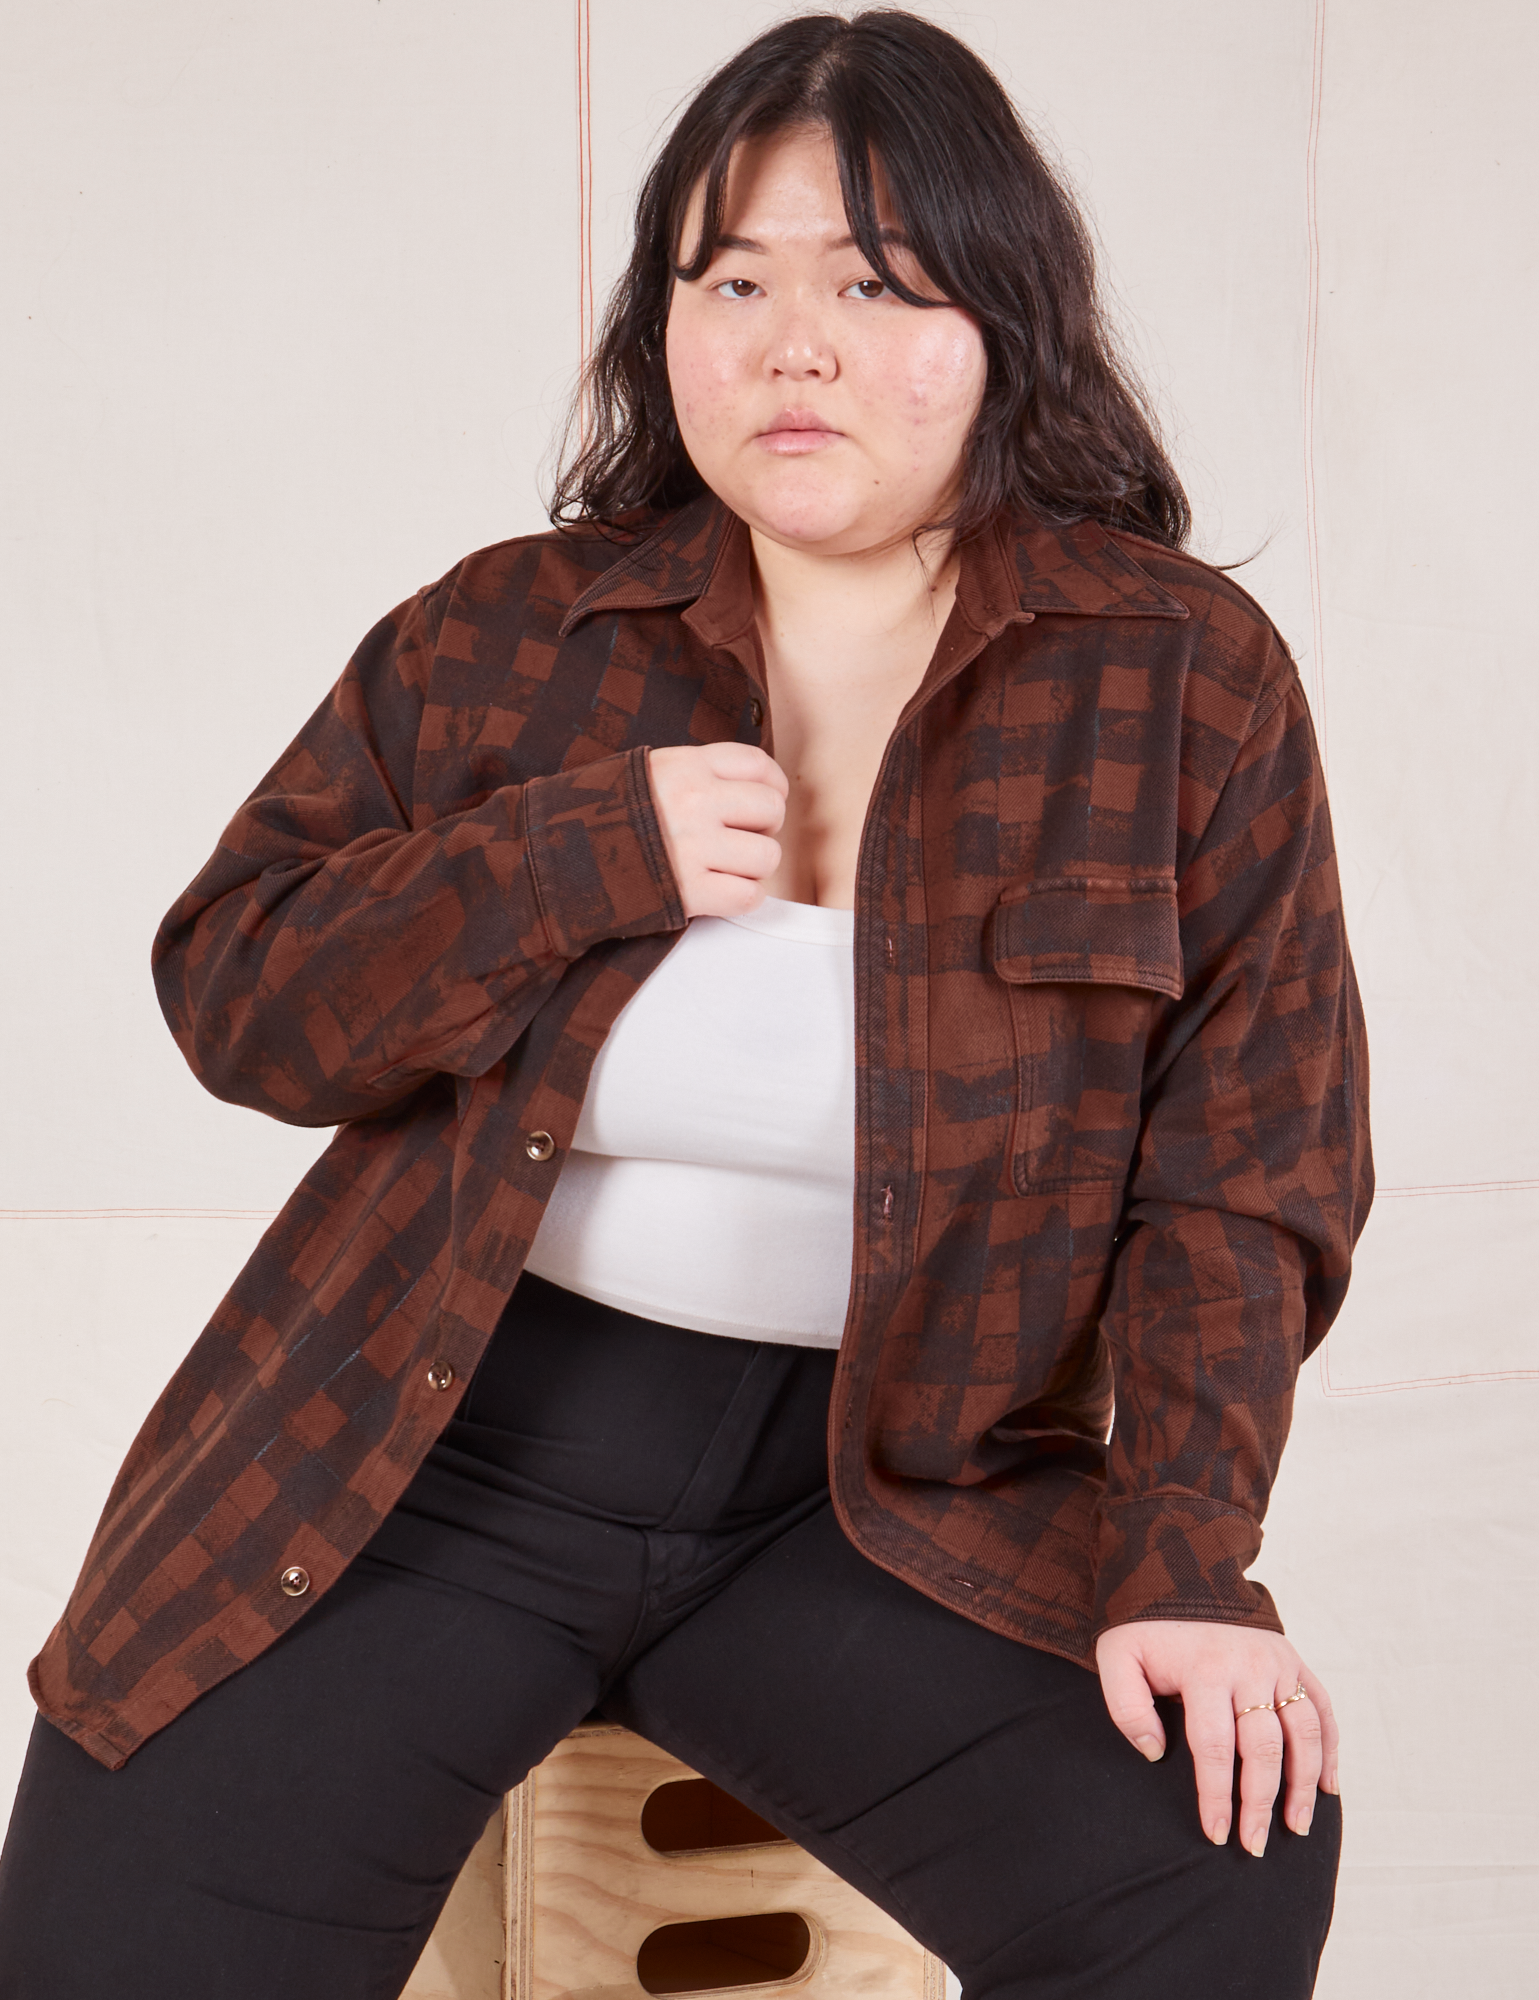 Ashley is wearing Plaid Flannel Overshirt in Fudgesicle Brown